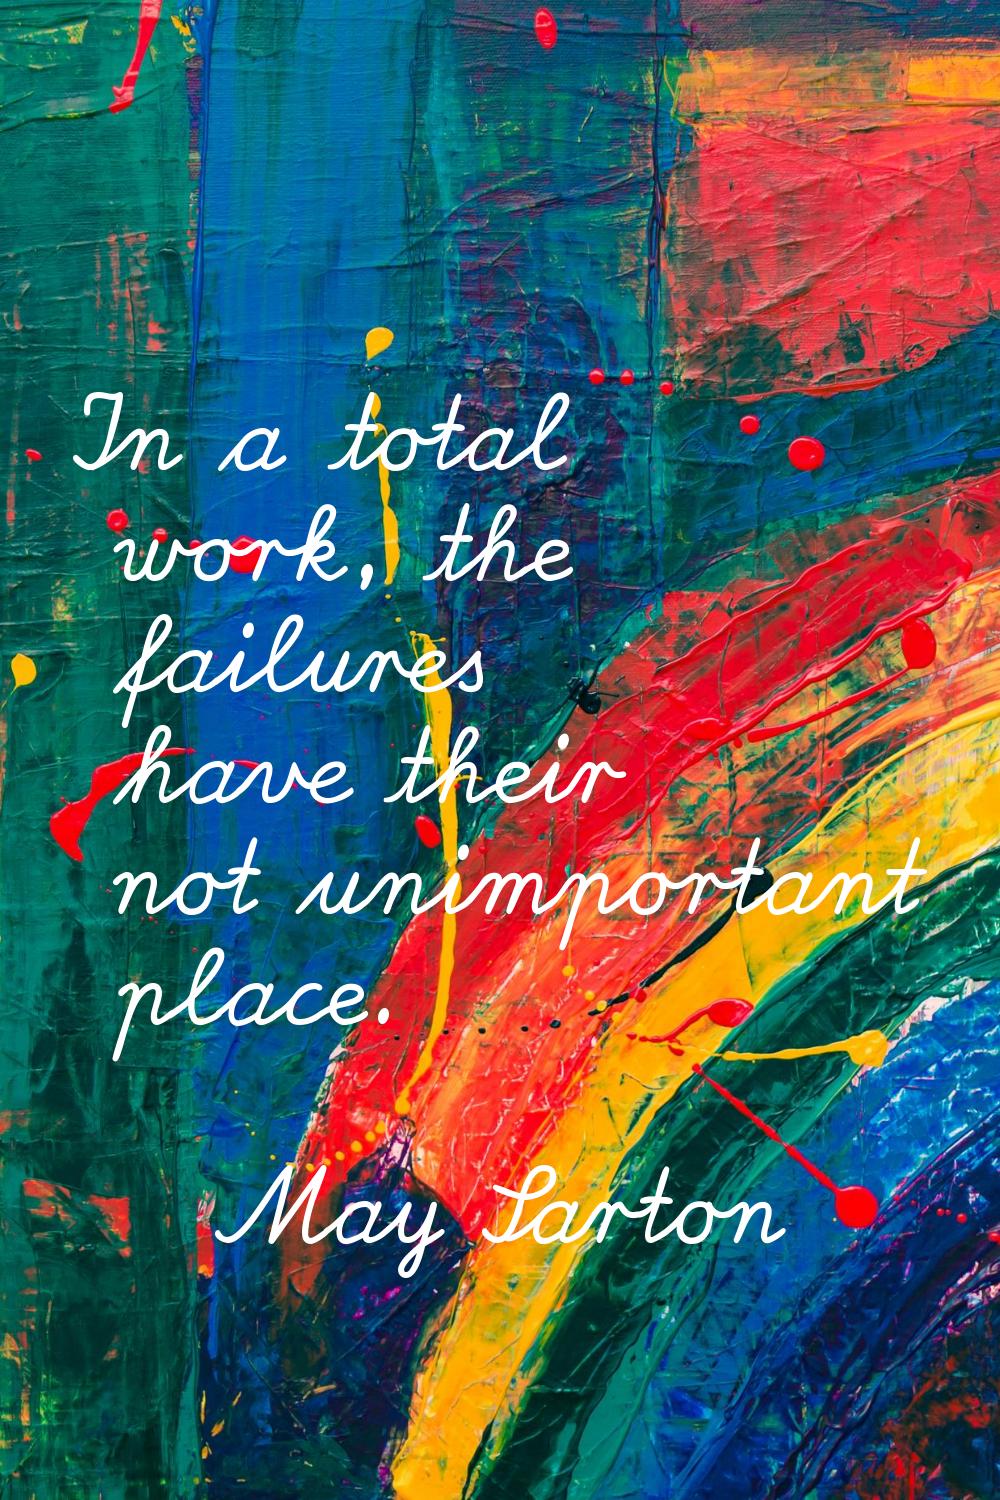 In a total work, the failures have their not unimportant place.